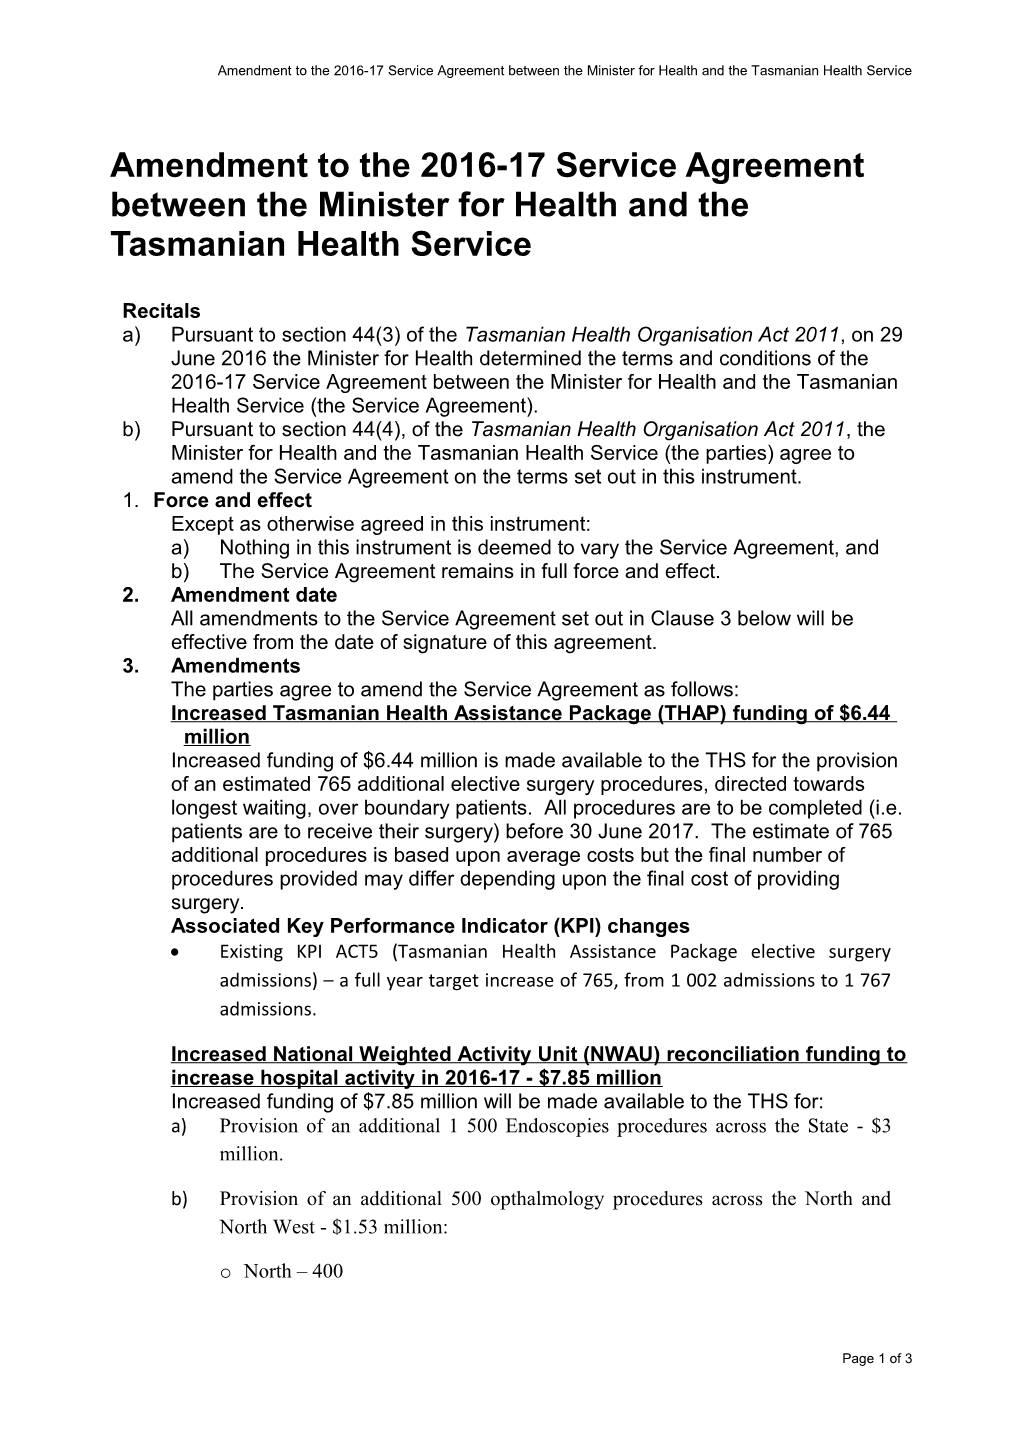 Amendment to the 2016-17 Service Agreement Between the Minister for Health and the Tasmanian